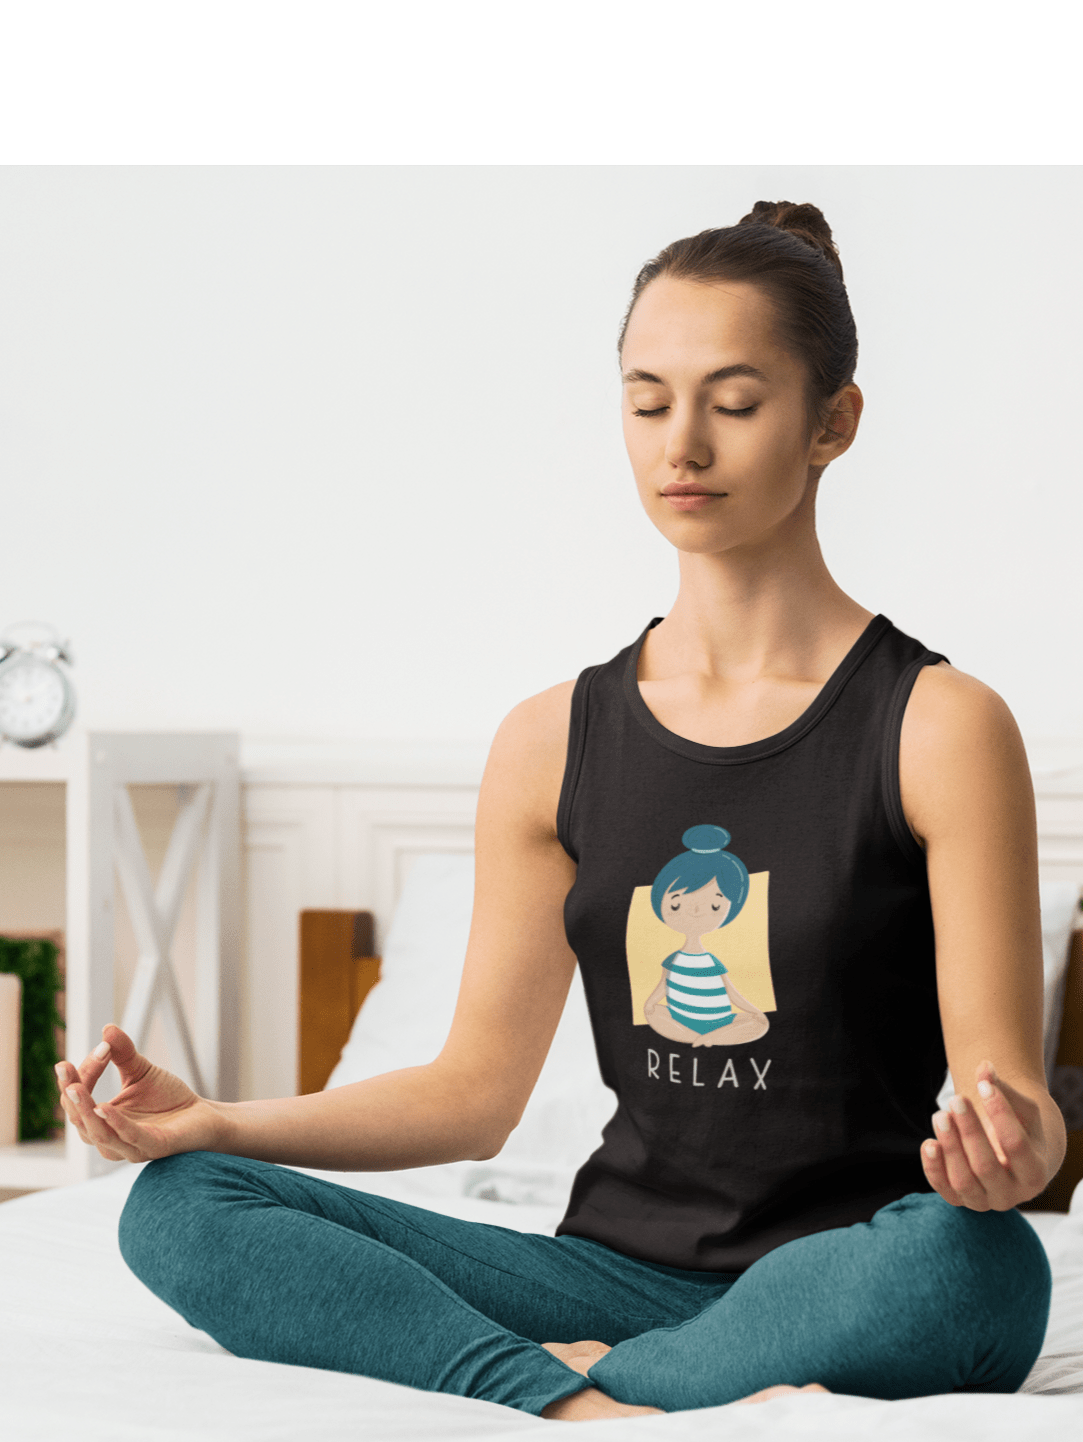 RELAX : Yoga Tank Tops by ANTHERR